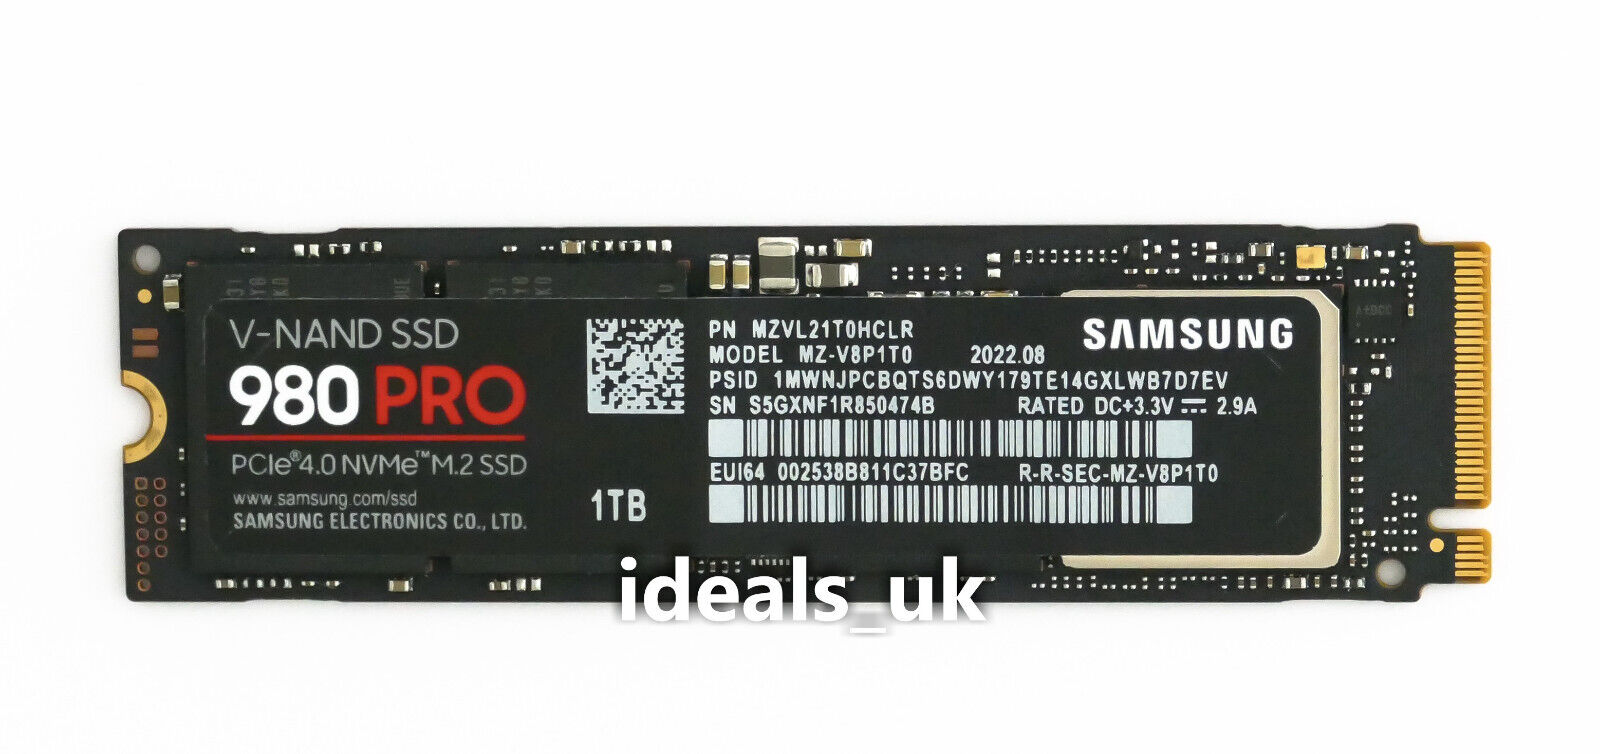 Samsung 980 PRO 1TB M.2 (PCIe 4.0 x4) (MZ-V8P1T0) NVMe Solid State Drive